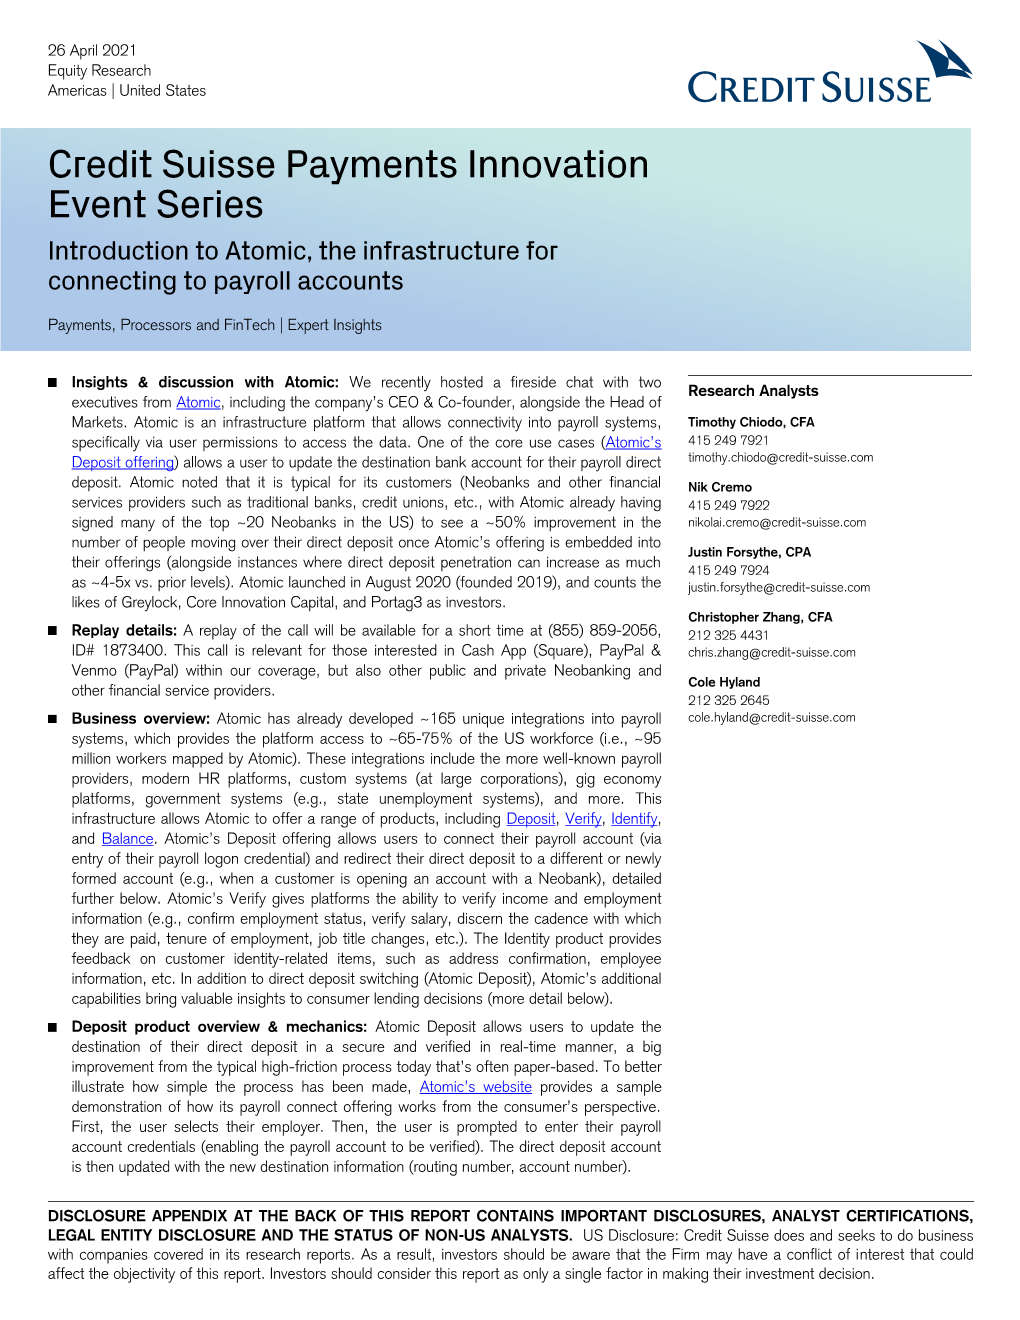 Credit Suisse Payments Innovation Event Series Introduction to Atomic, the Infrastructure for Connecting to Payroll Accounts